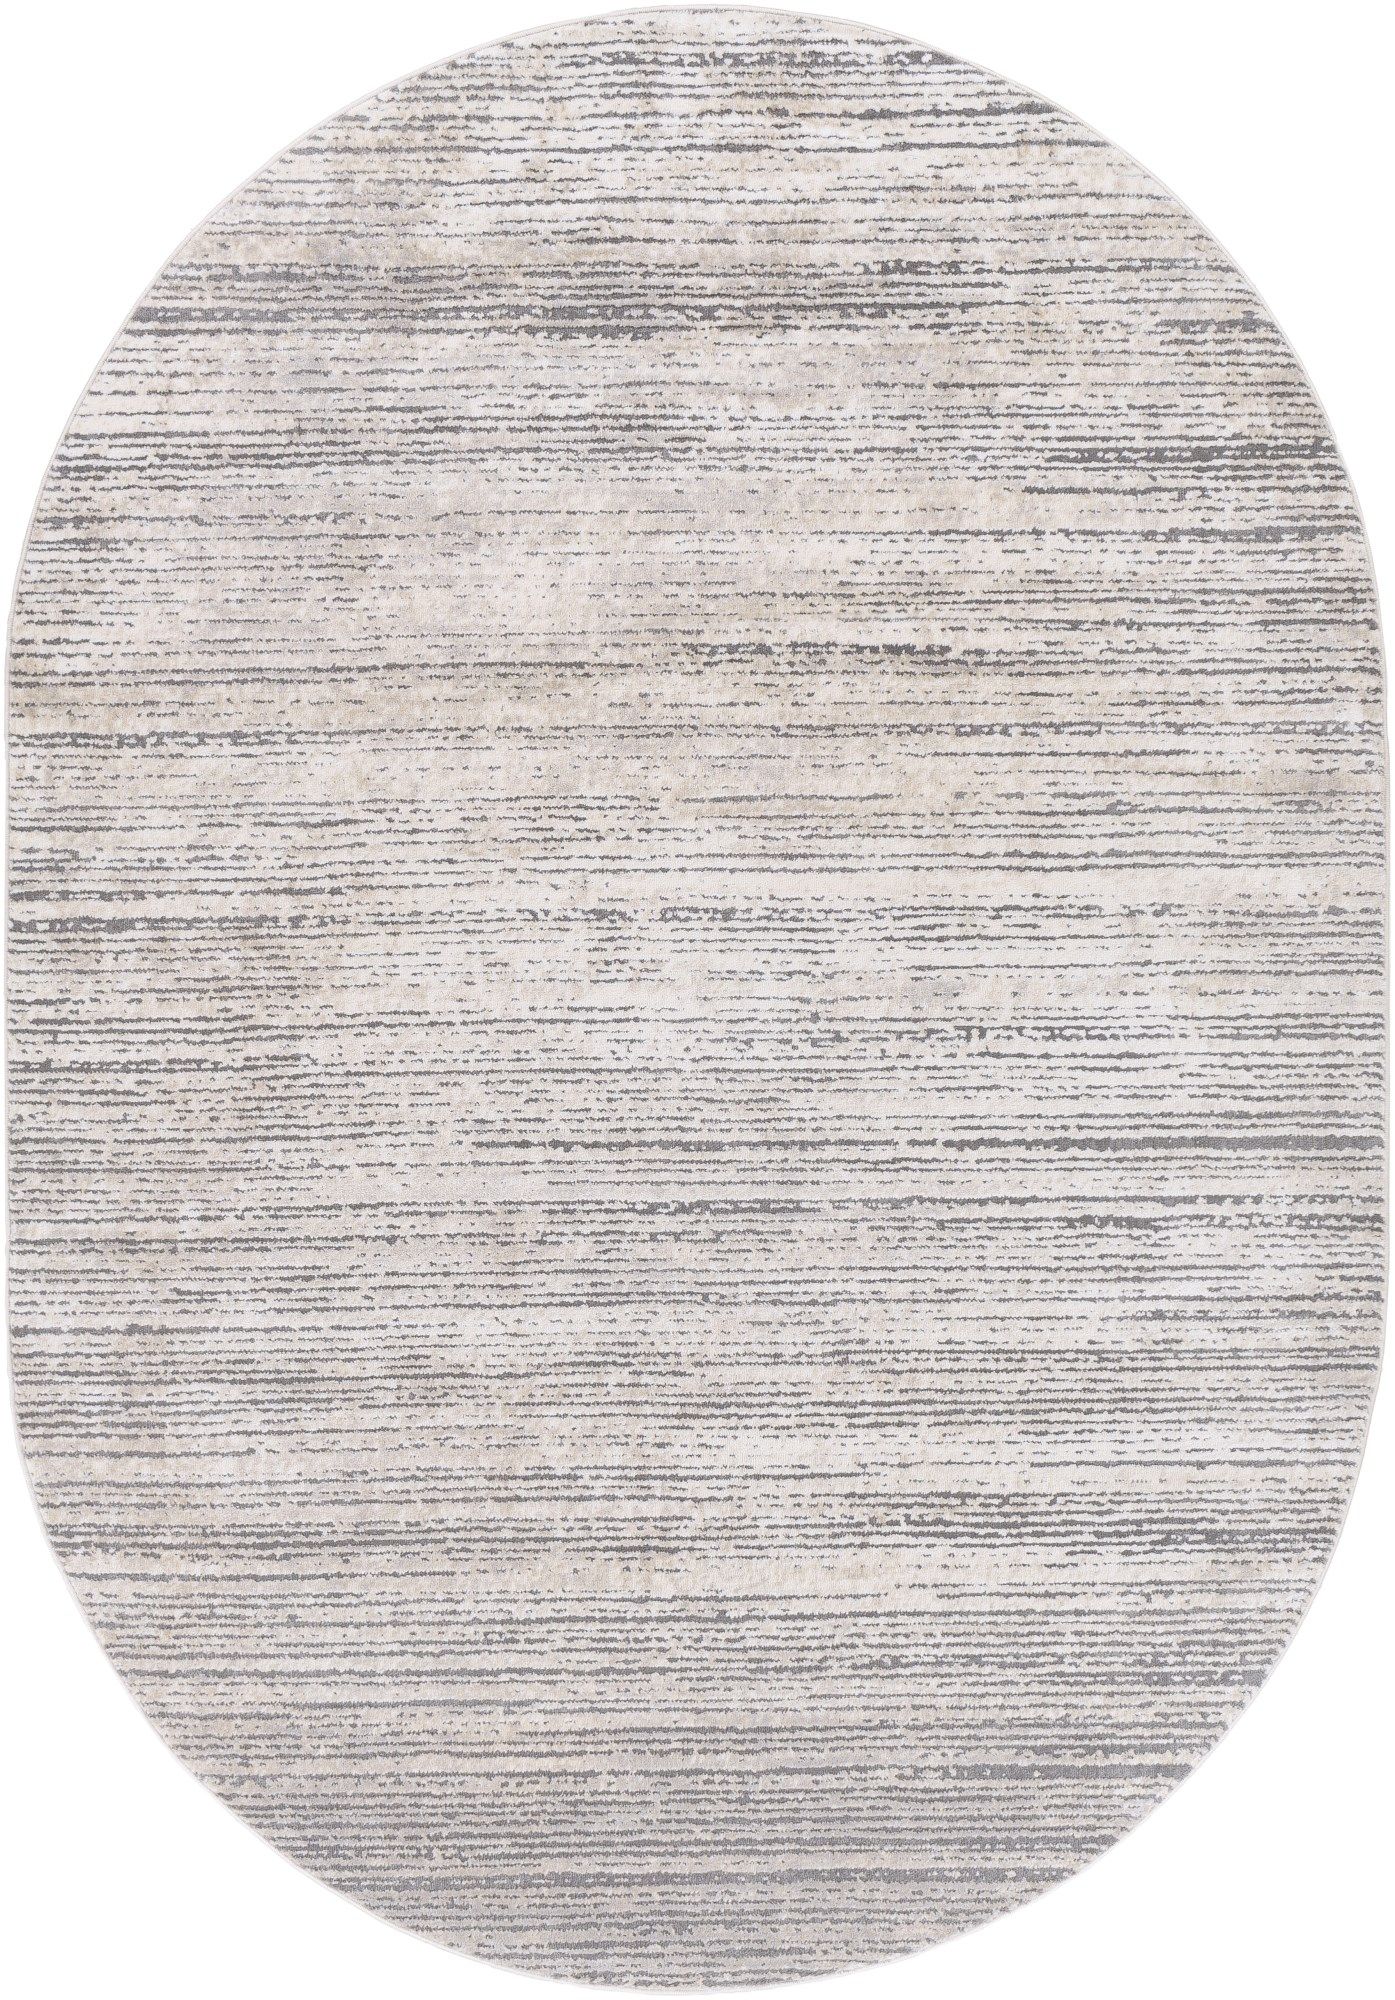 Oval Contemporary / Modern Rugs | Rugs Direct Regarding Oval Rugs (View 8 of 15)